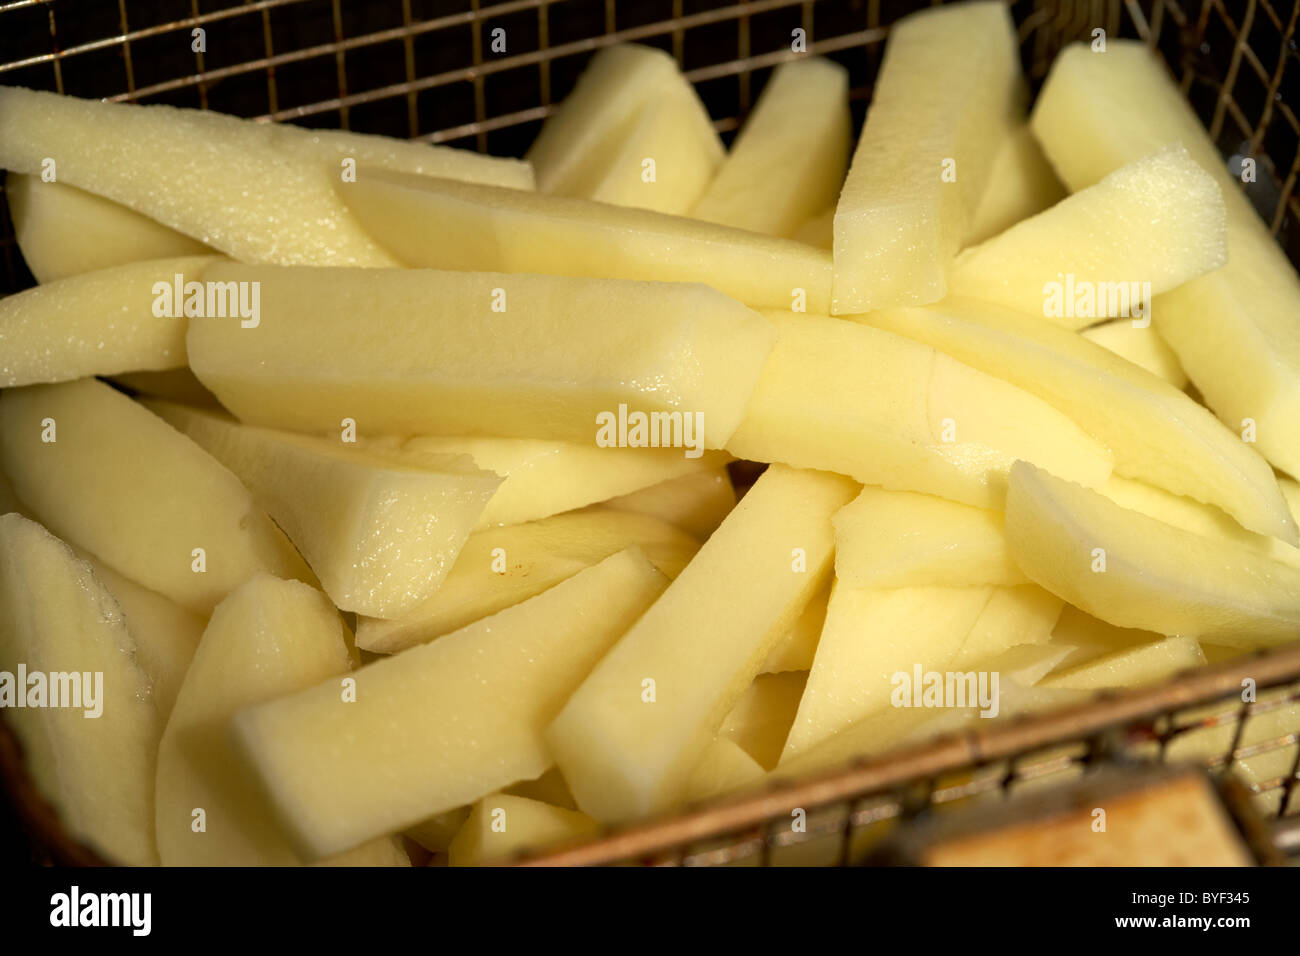 raw sliced cut home made chips from fresh potatoes Stock Photo